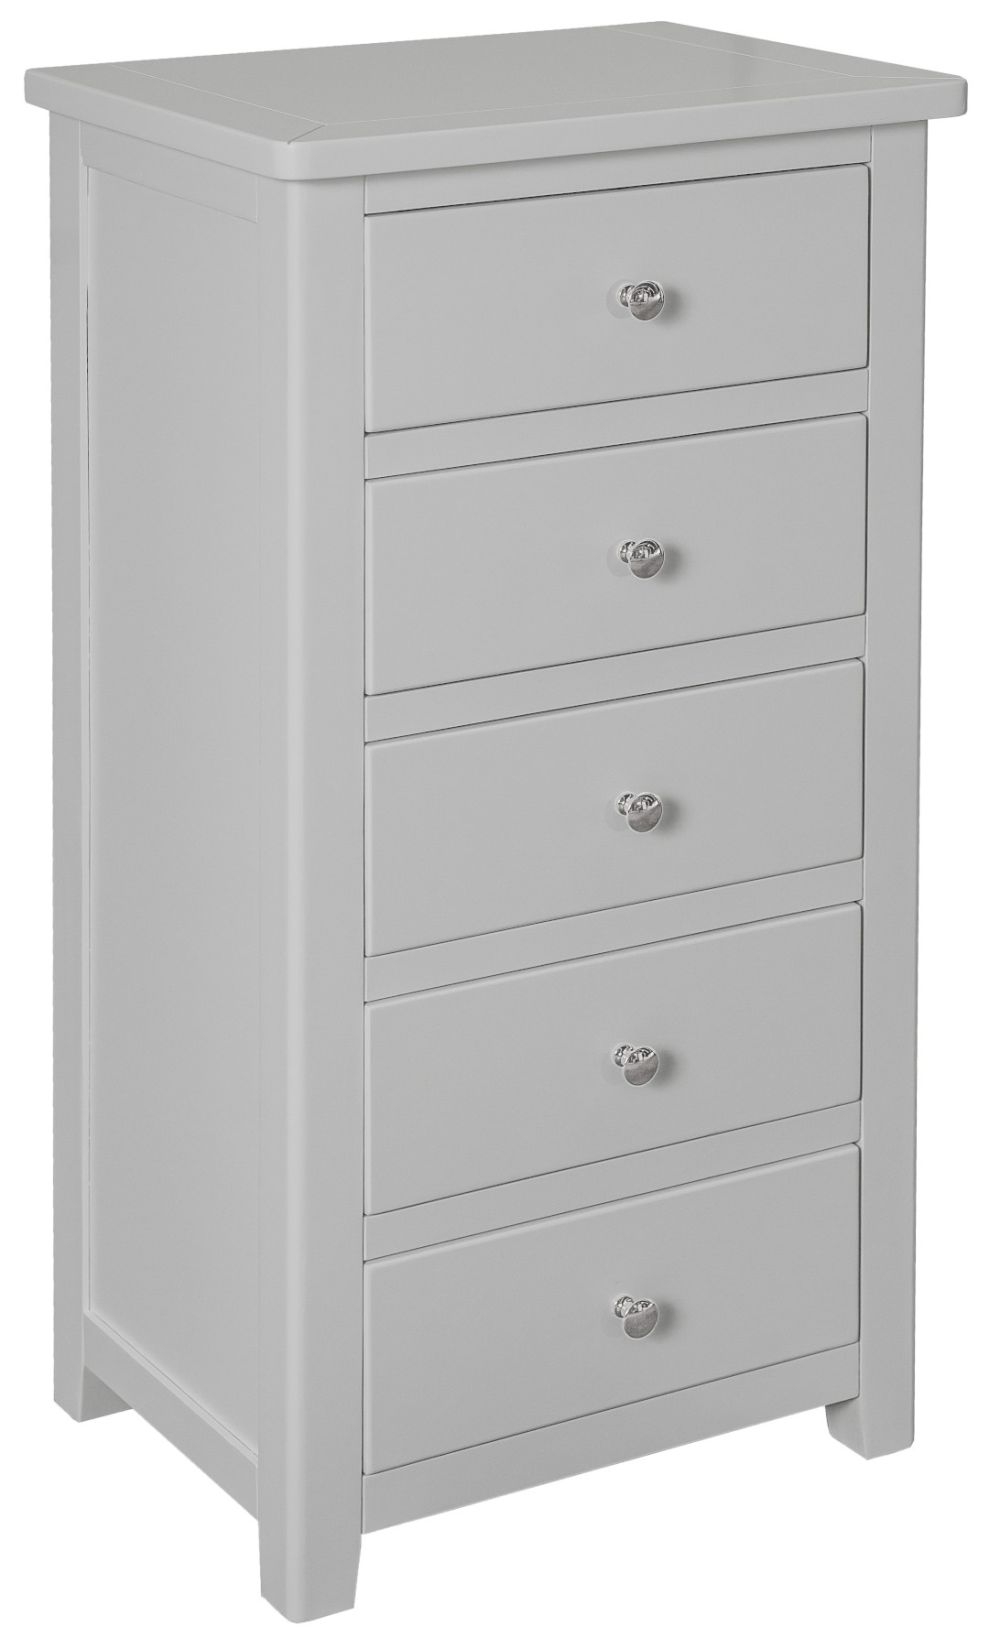 Henley Grey Painted 5 Drawer Narrow Chest